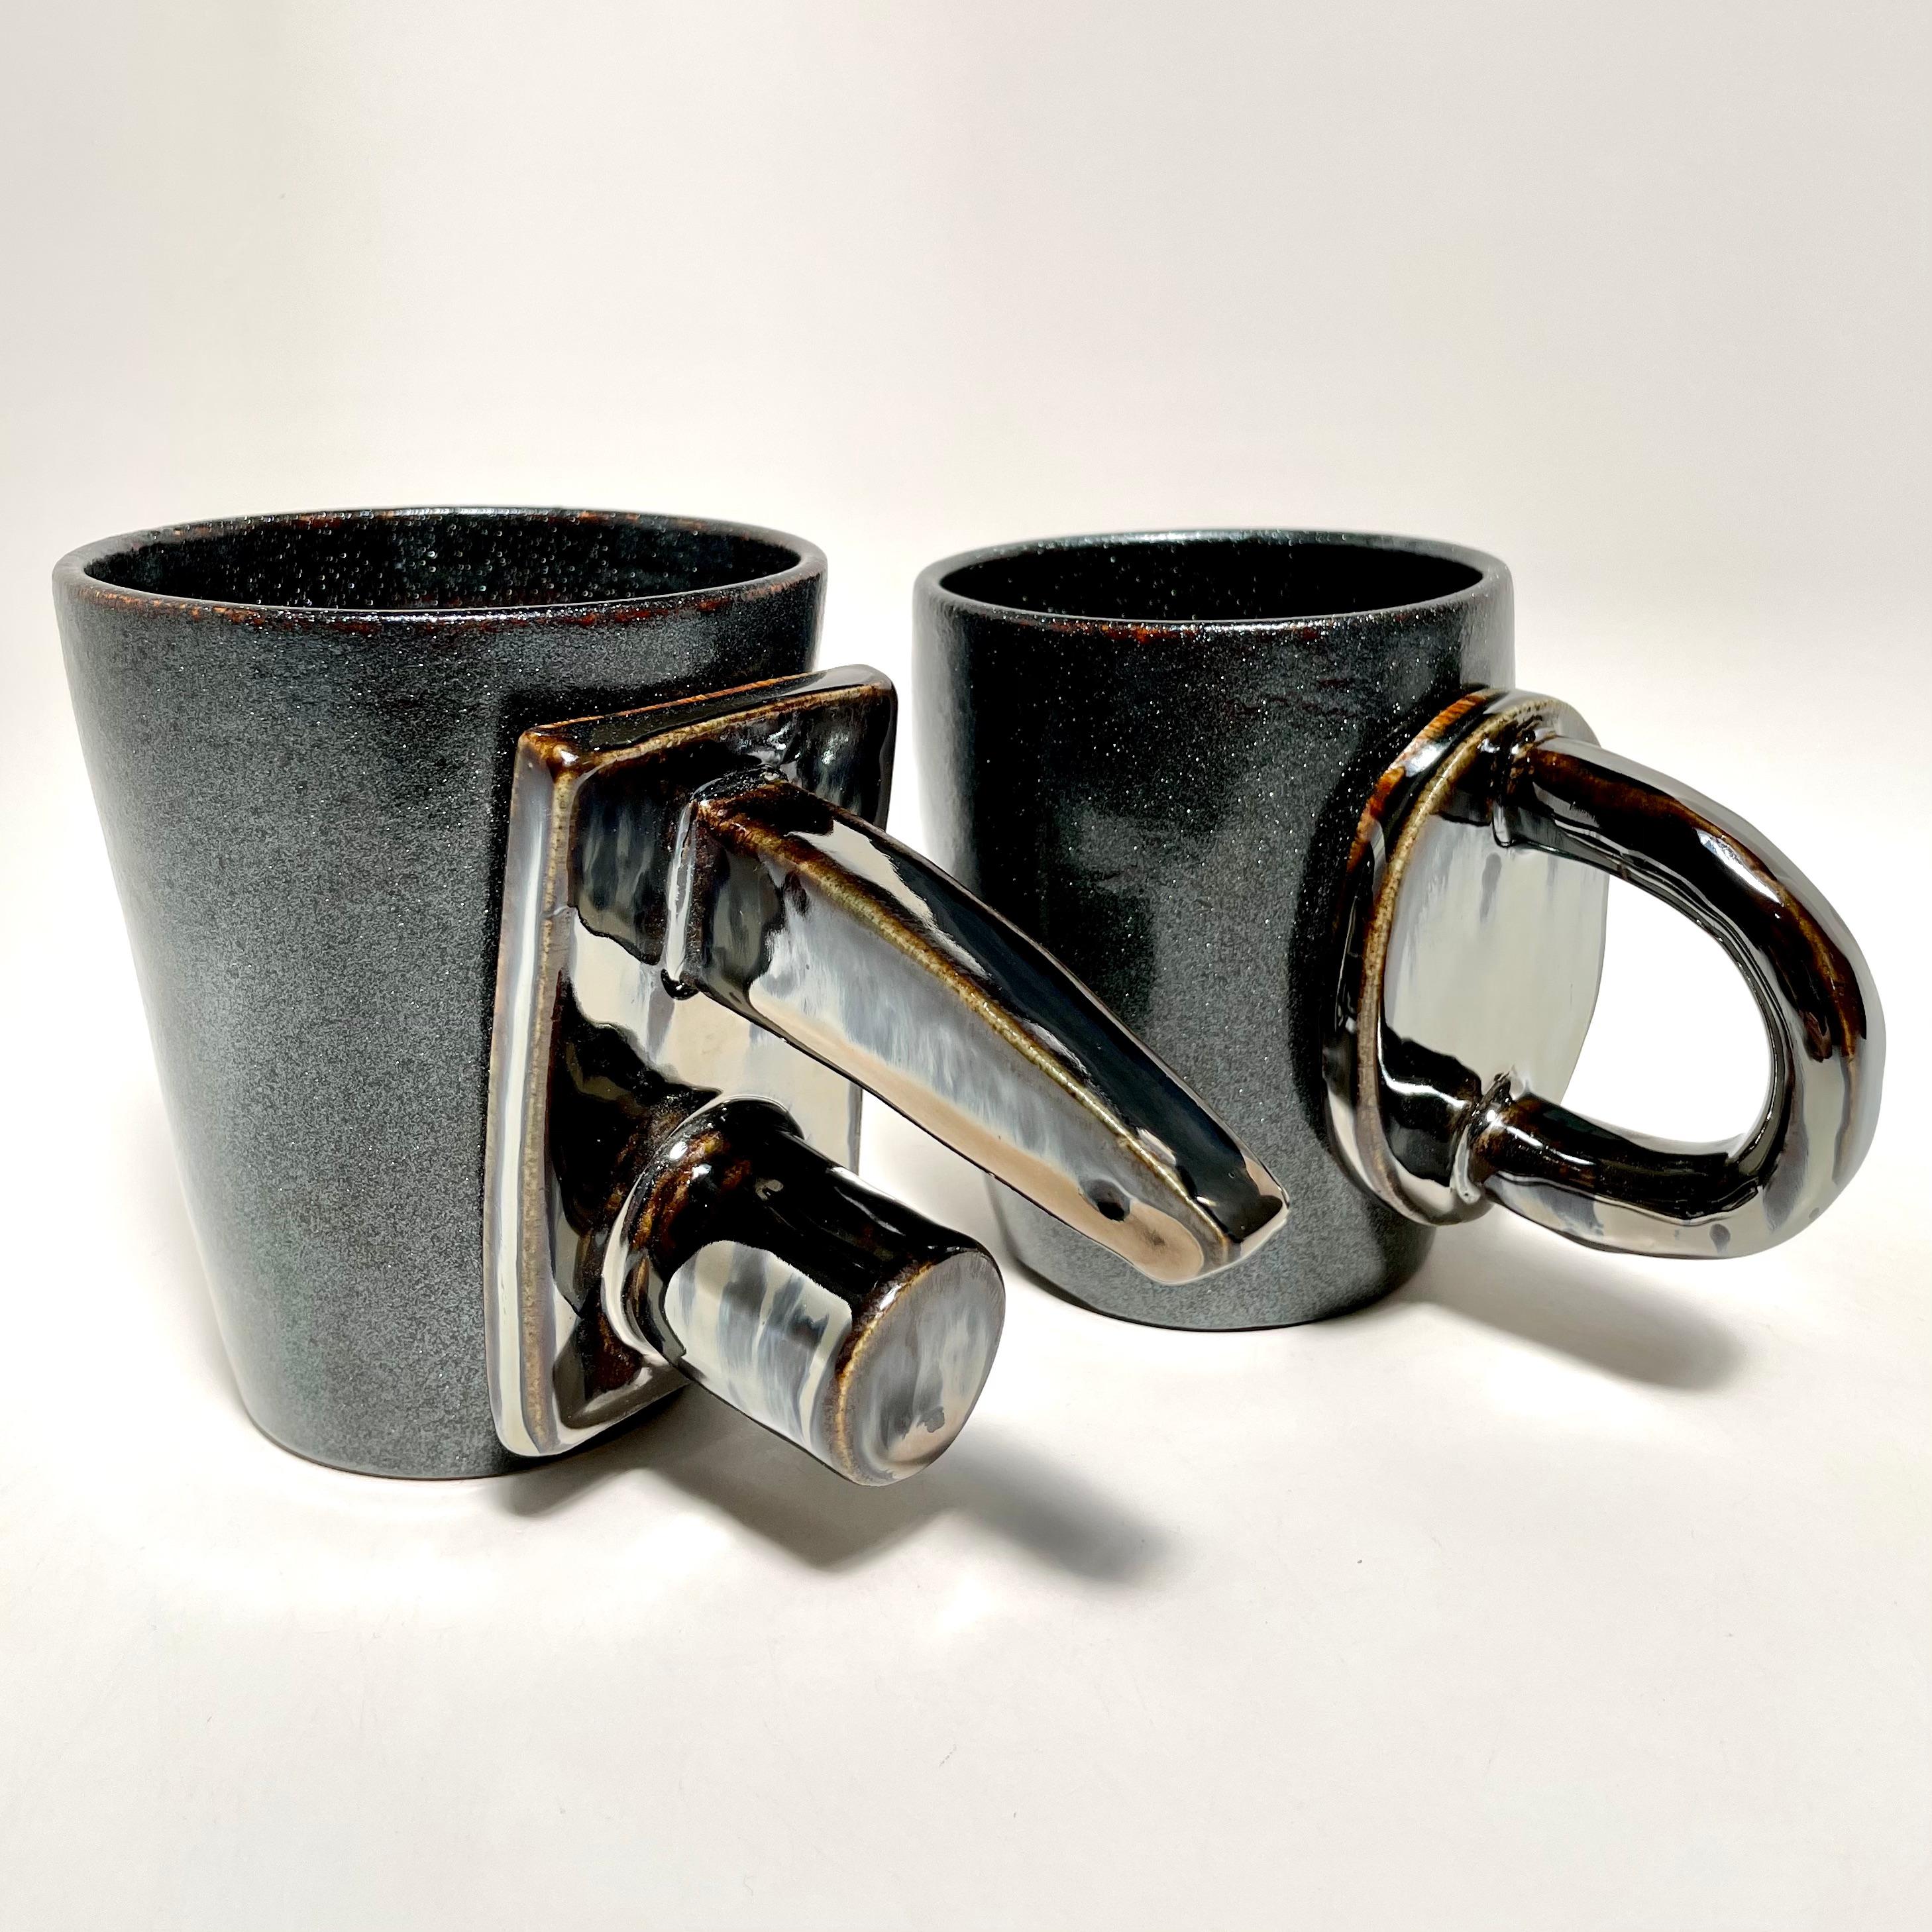 The D:Ring, shown here in Epsilon and Broken Silver, the food safe vessel for your favorite beverage of choice, entertaining, or as a decorative object or object d'art. Versatile, sustainable and one of kind, made of recycled stoneware and 100% lead